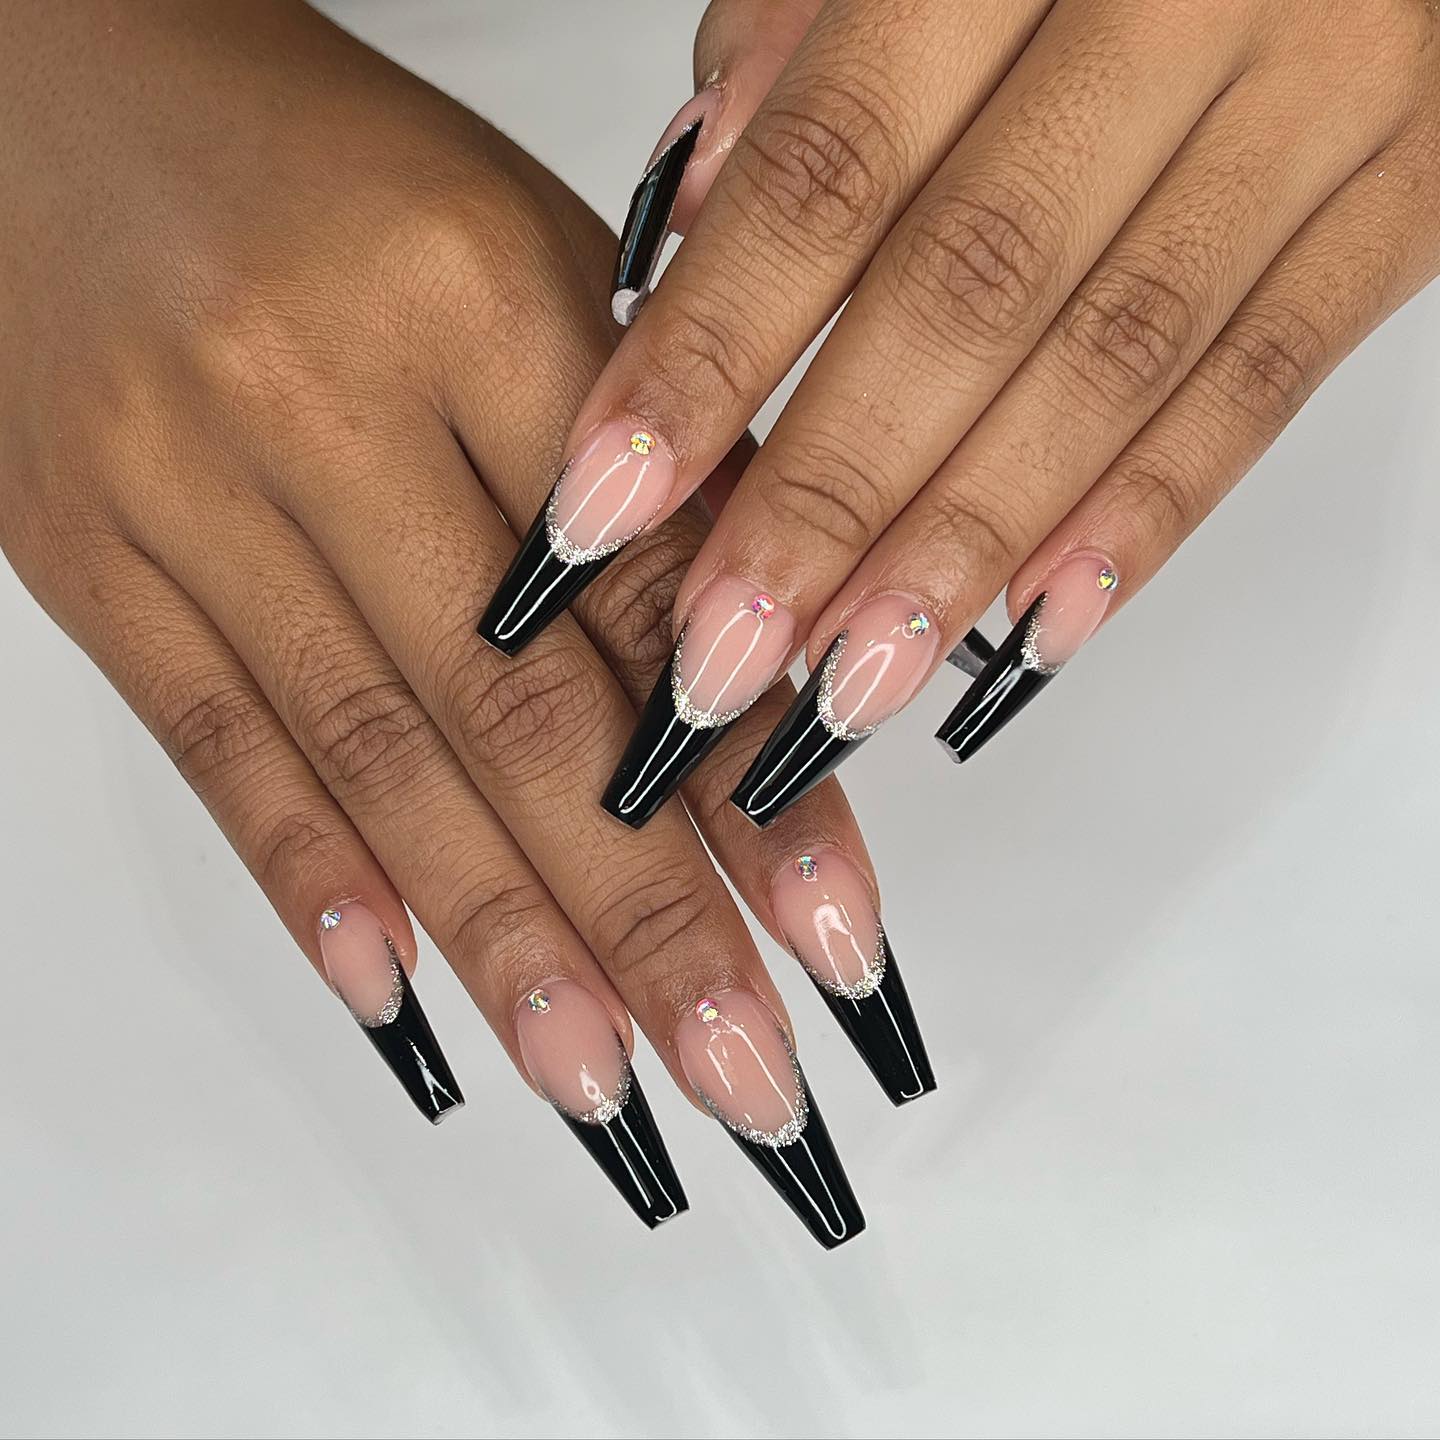 Black and Nude Coffin Nails